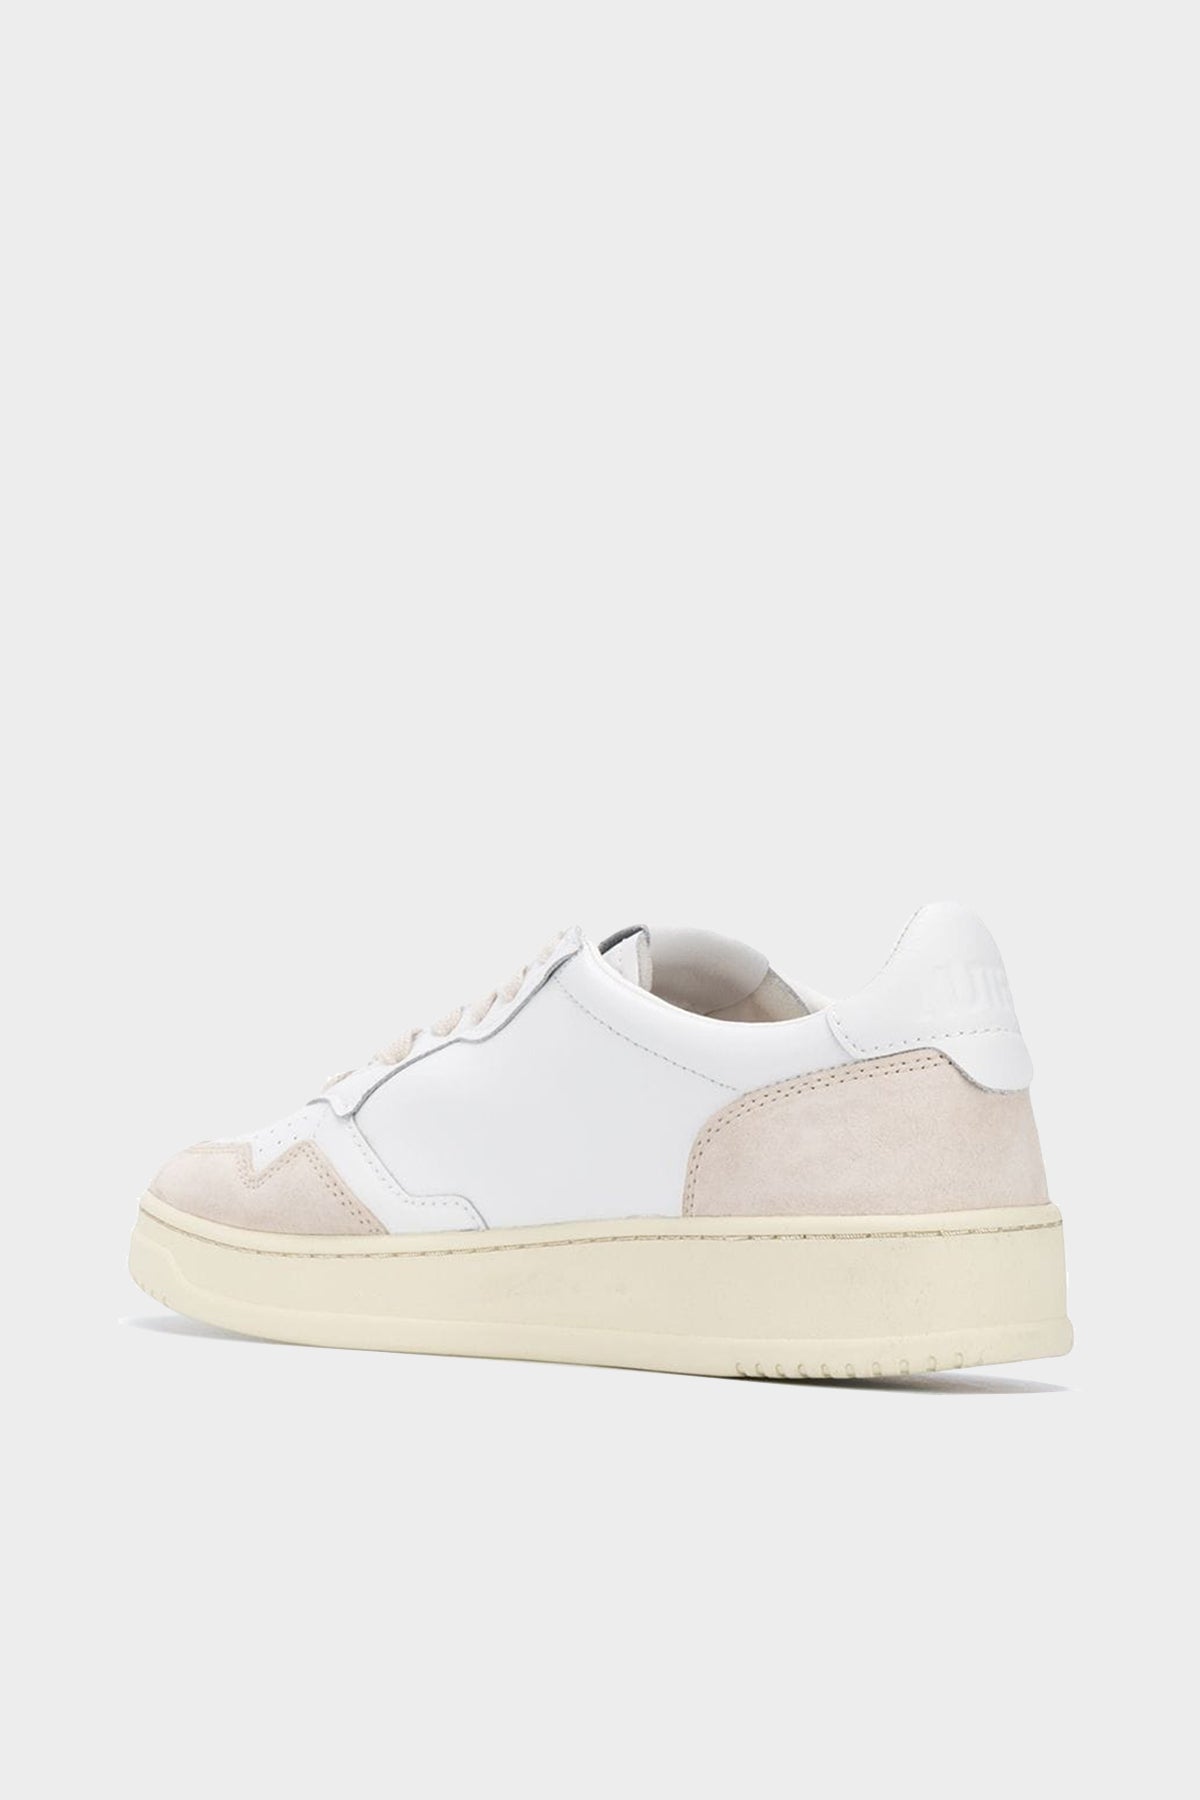 Medalist Low Suede Leather Men Sneaker in White - shop-olivia.com